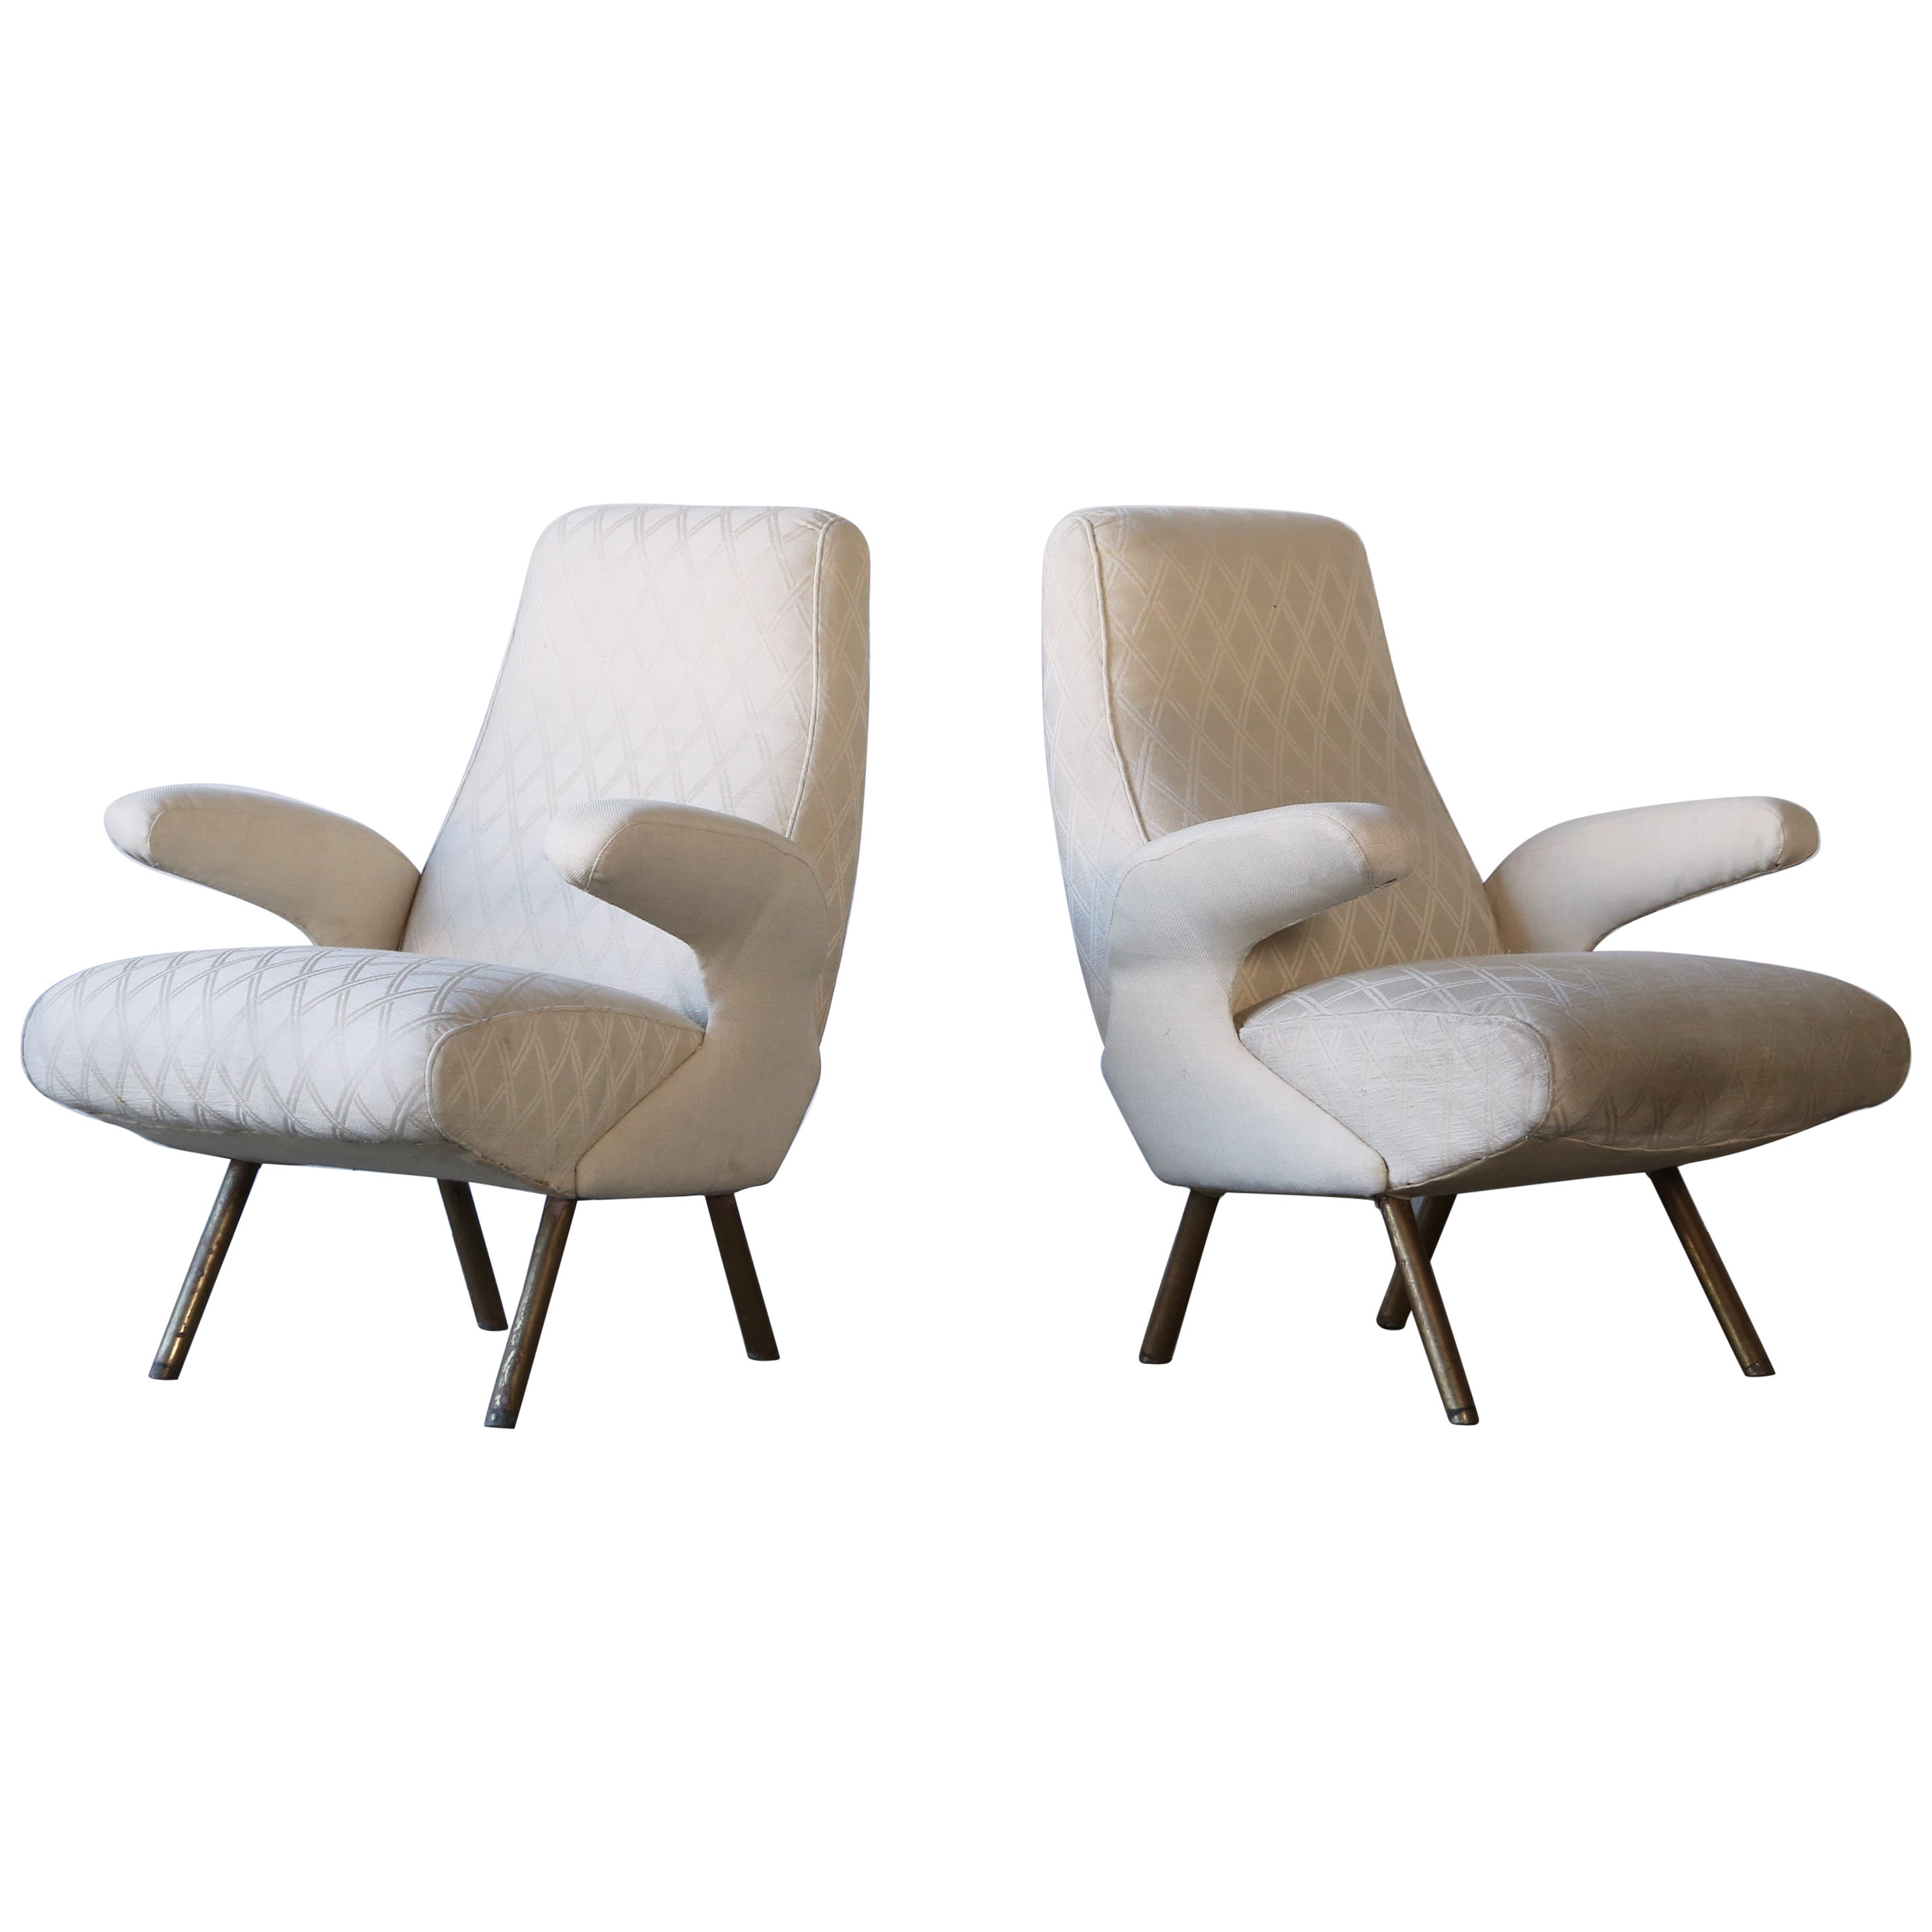 Nino Zoncada Attributed Lounge Chairs, Italy, 1950s, for Reupholstery